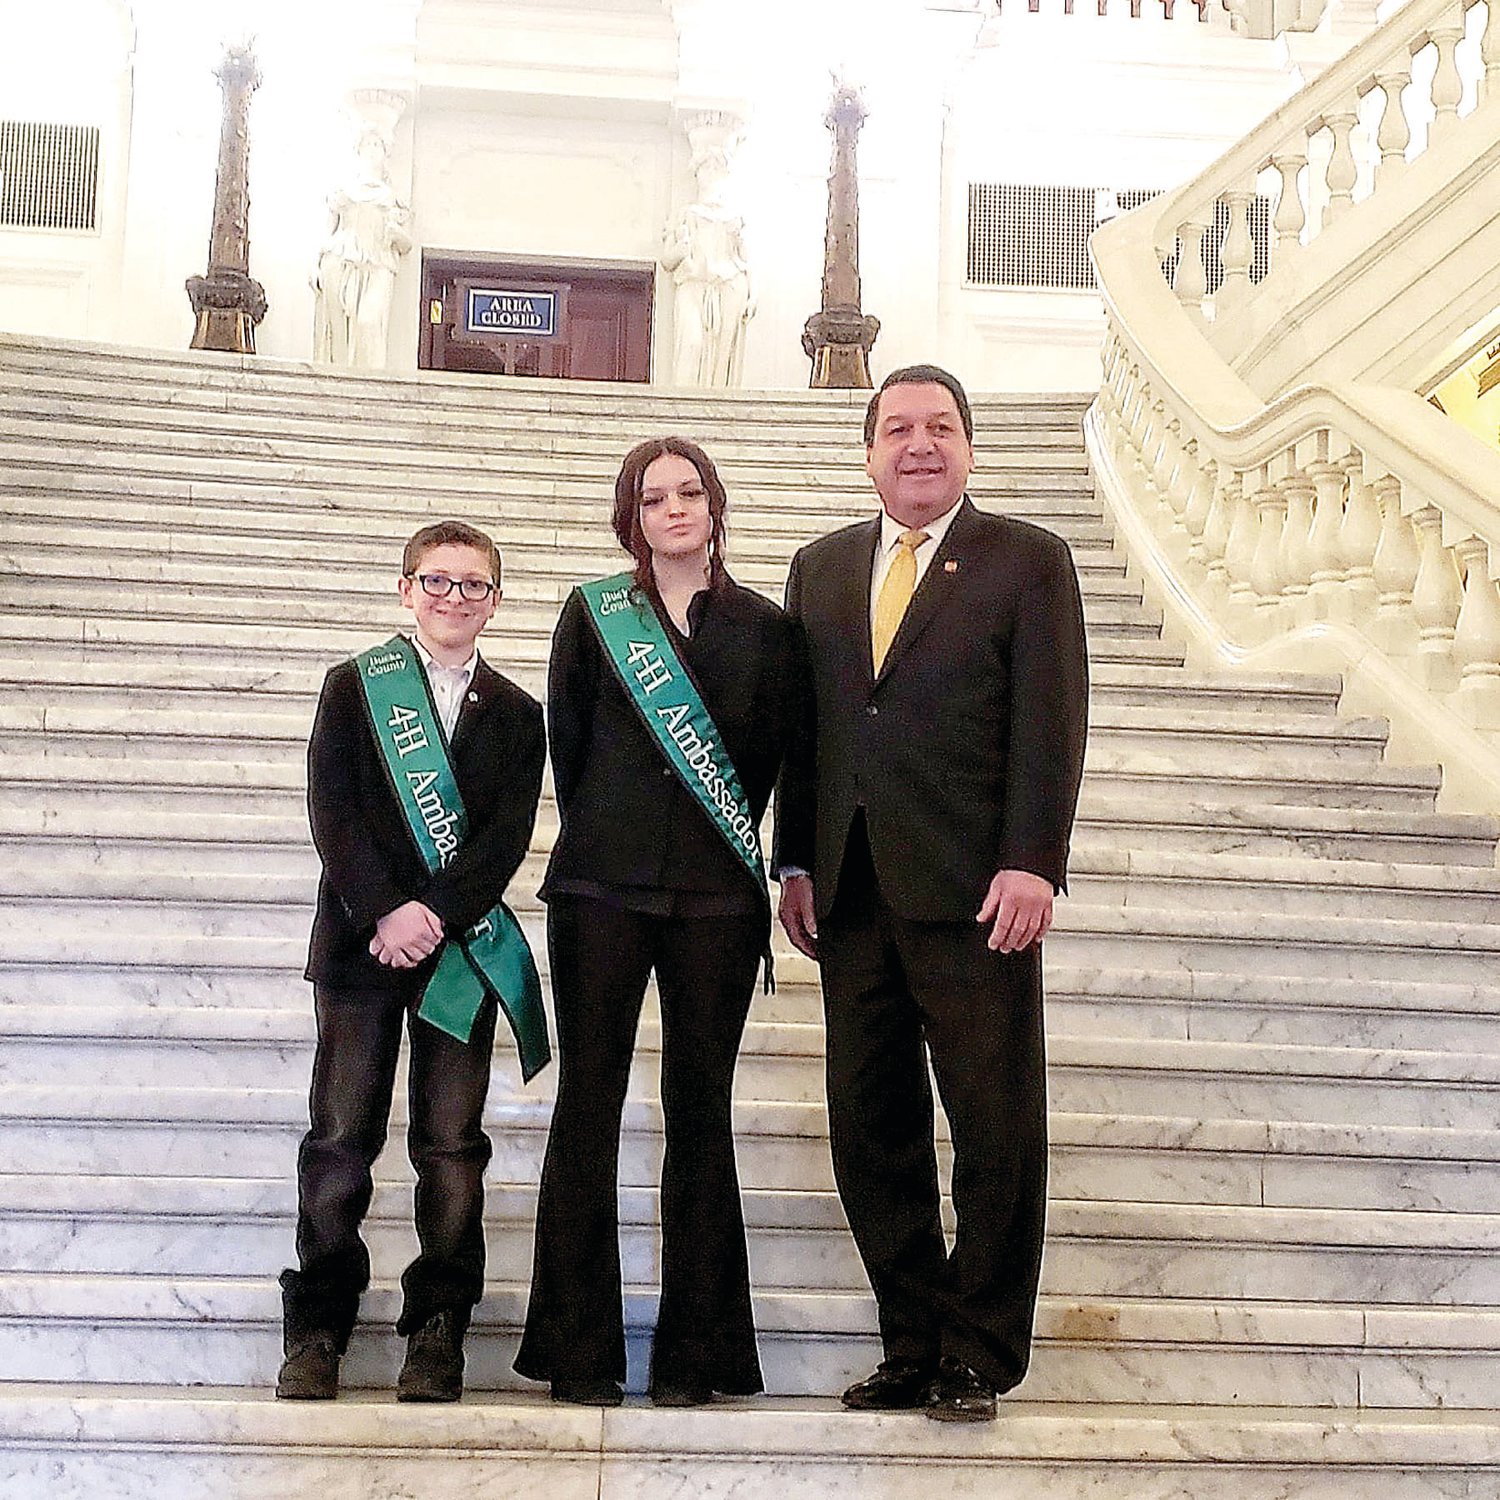 State Rep. Craig Staats of the 145th Legislative District, showed David Dutertre and Layla Cotter around the state Capitol Jan. 12.